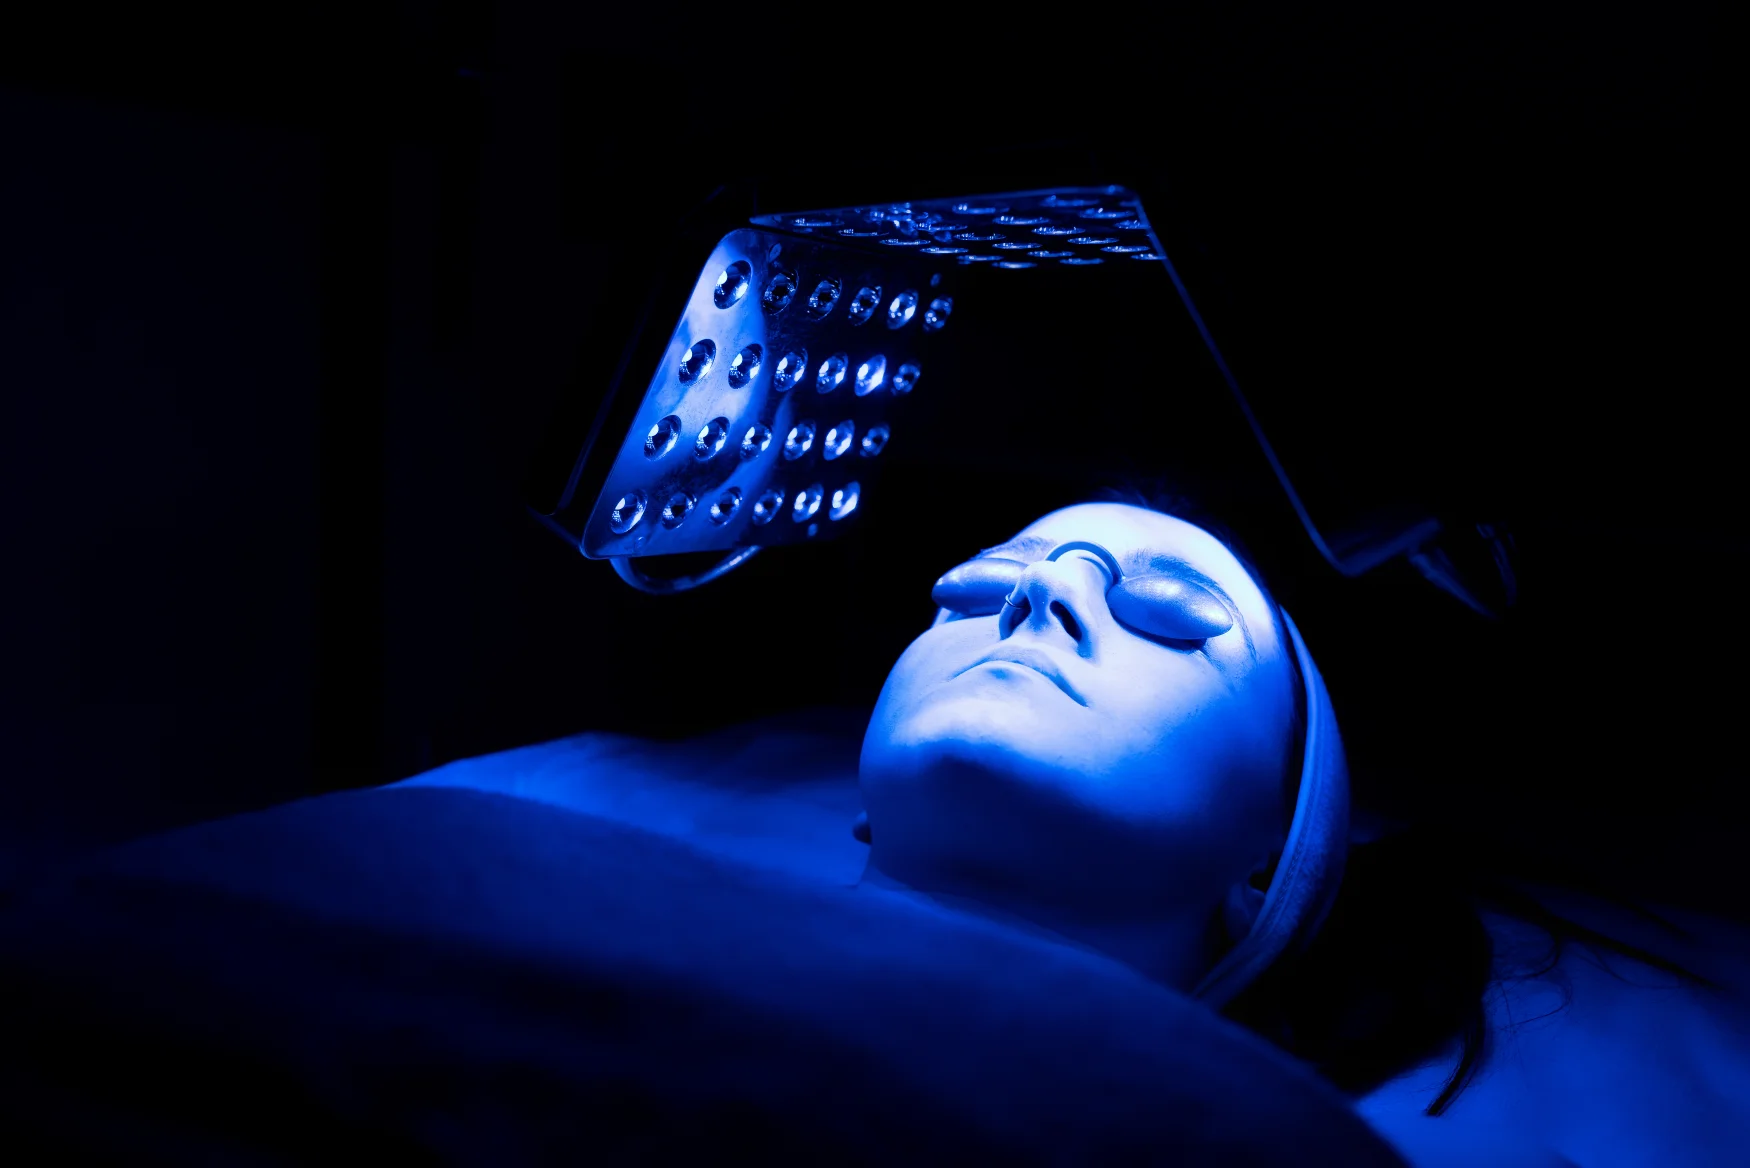 A woman wearing protective glasses is lying under a blue light machine.